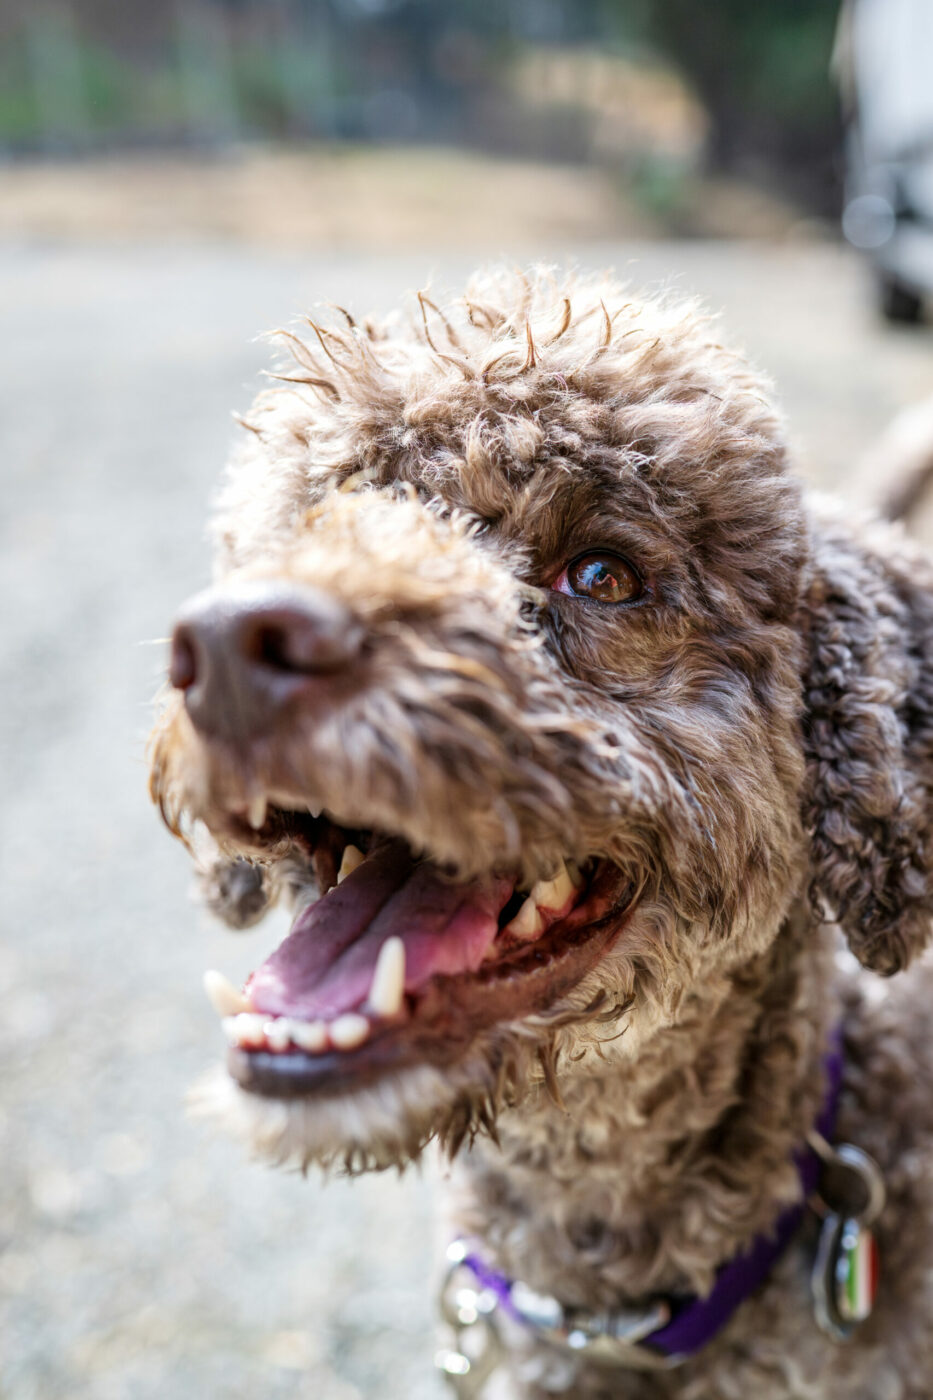  Alba, a 7-year-old female Lagotto Romagnolo, grins after a morning truffle hunt. She's rewarded with nuggets of plain baked chicken, a special treat she receives only for truffle work.